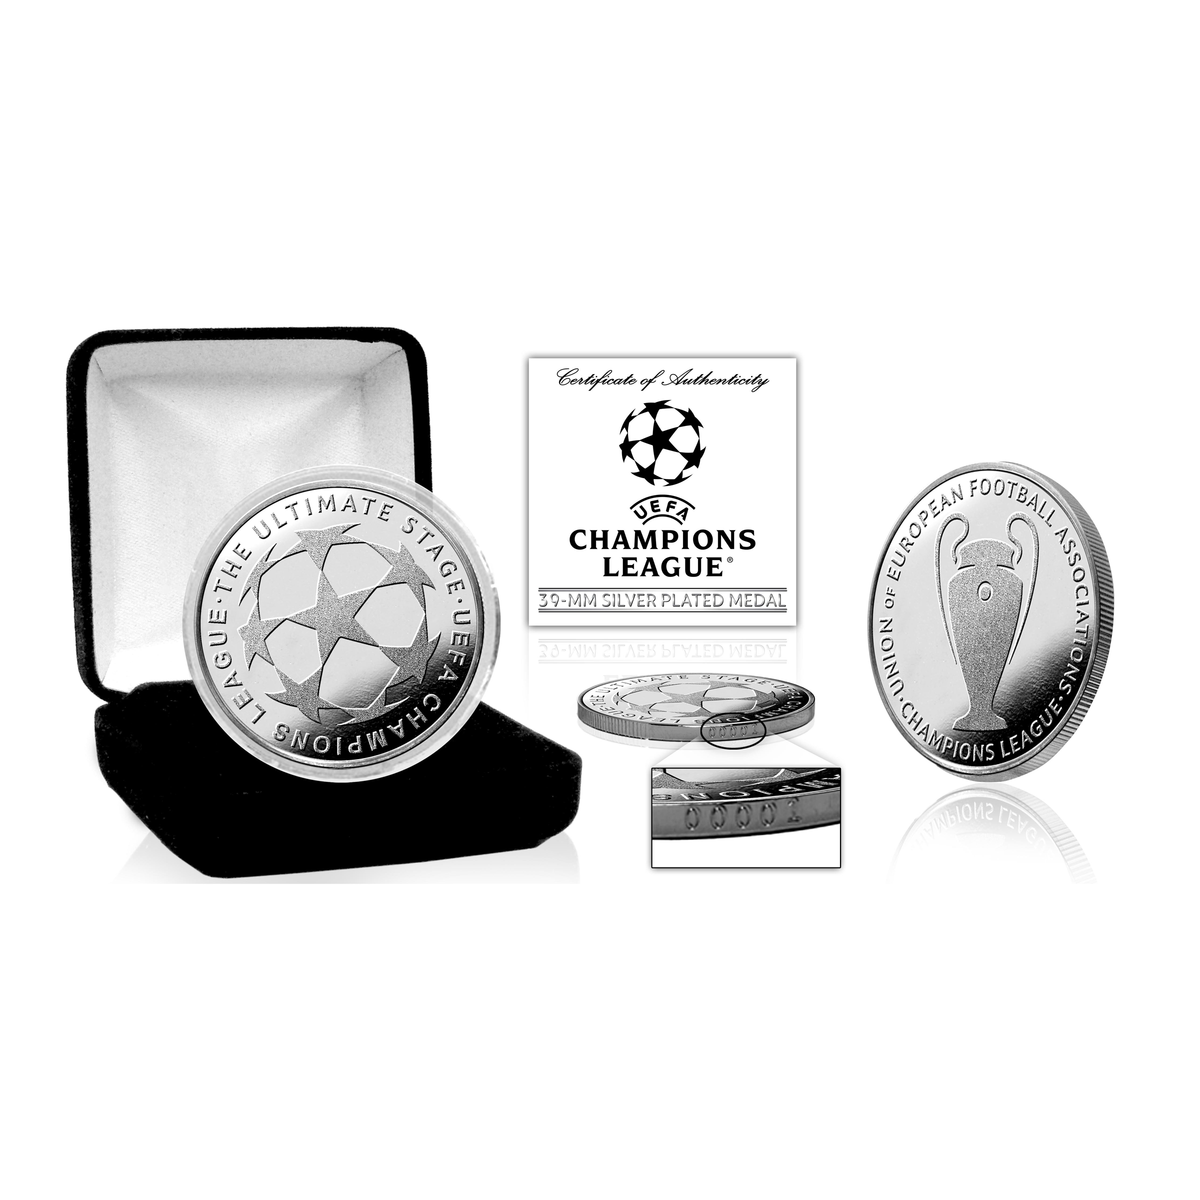 Champions League Starball and Trophy Commemorative Coin in Gift Box